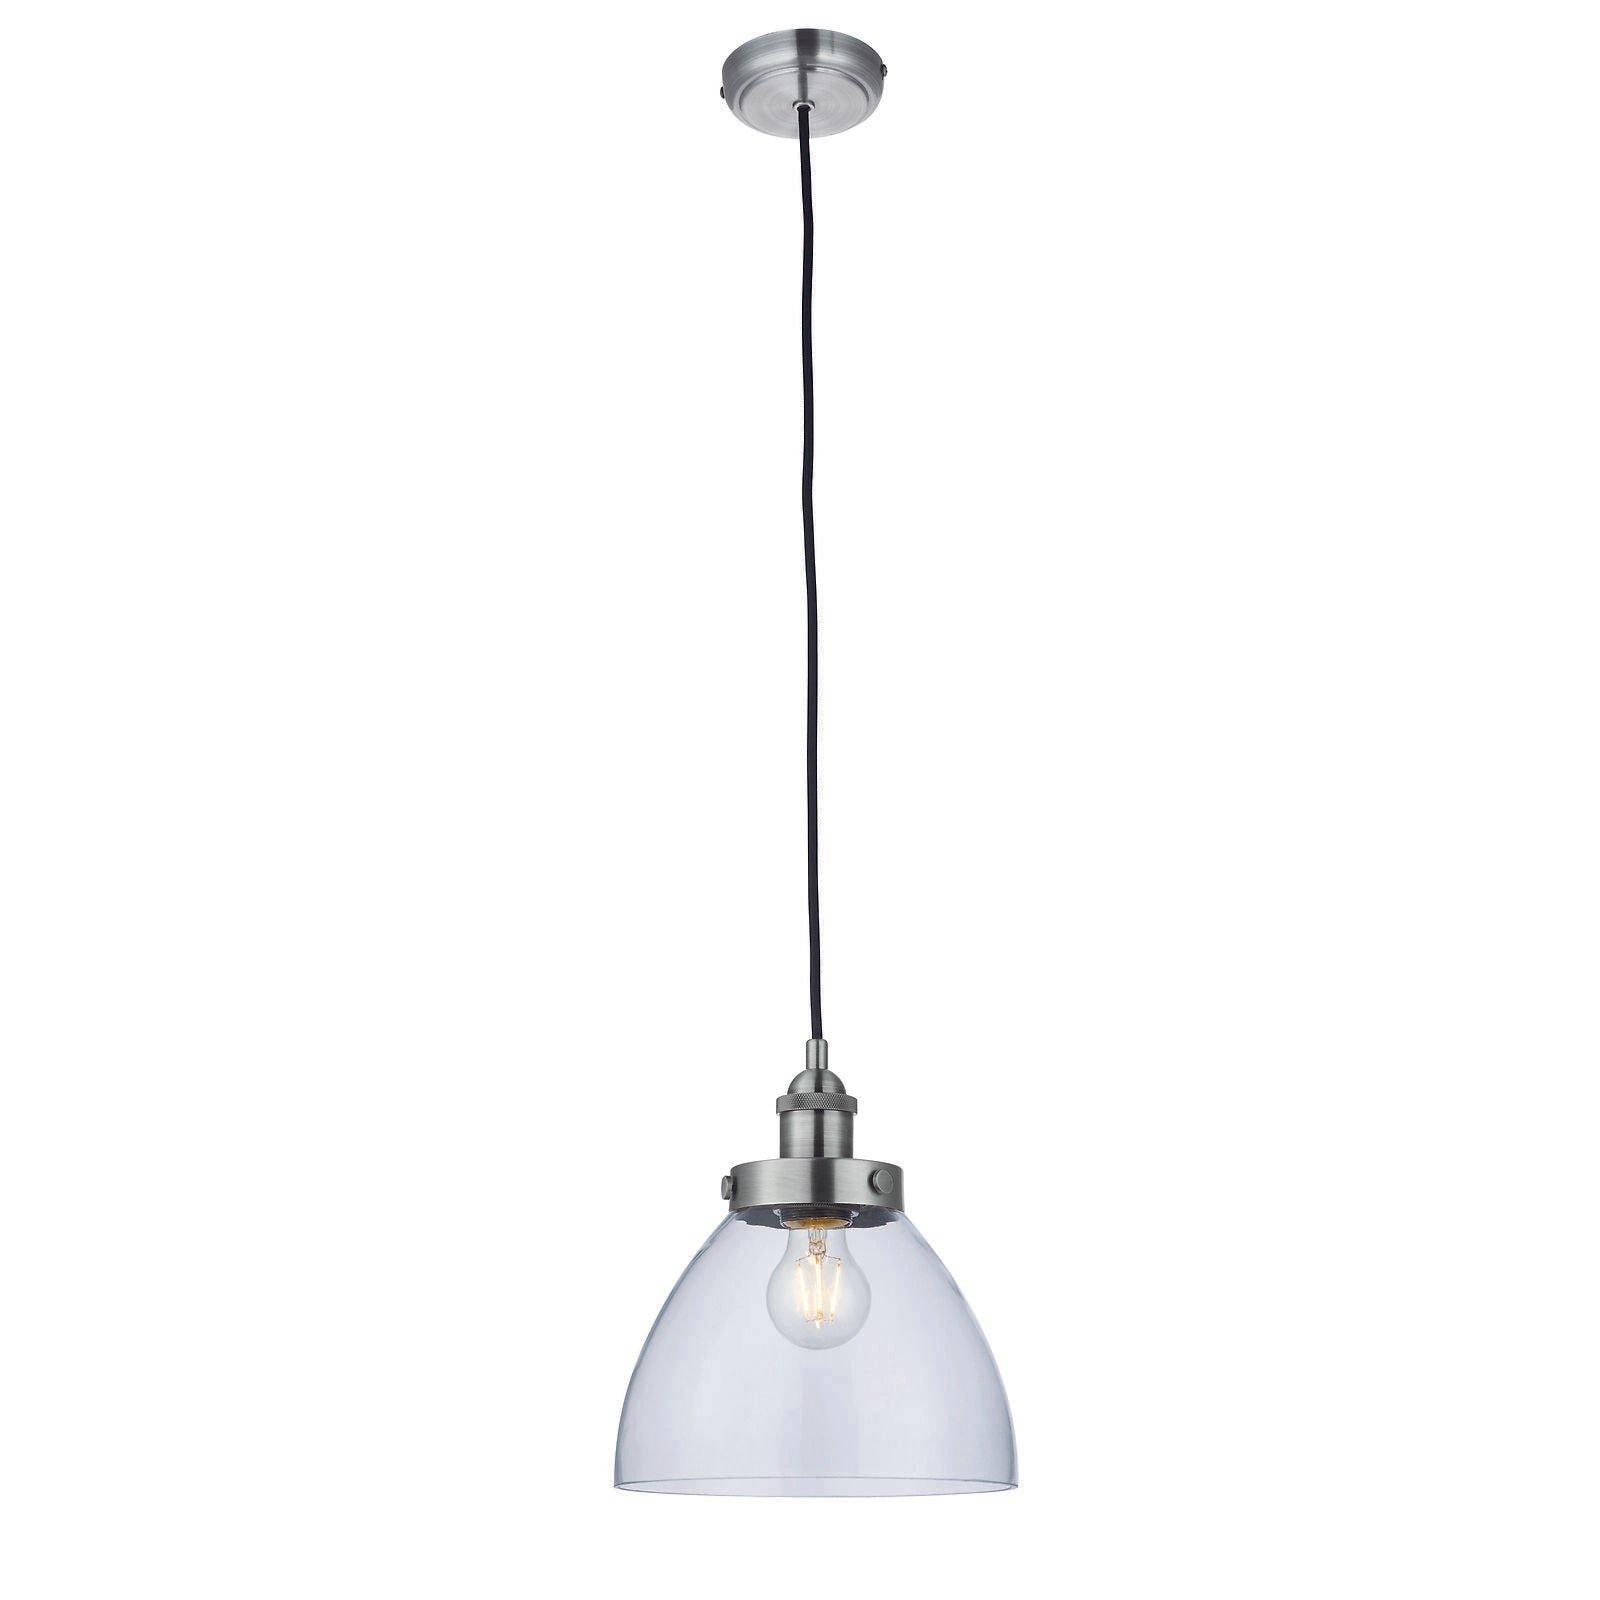 Ceiling Pendant Light - Brushed Silver Paint & Clear Glass - 40W E27 - Dimmable